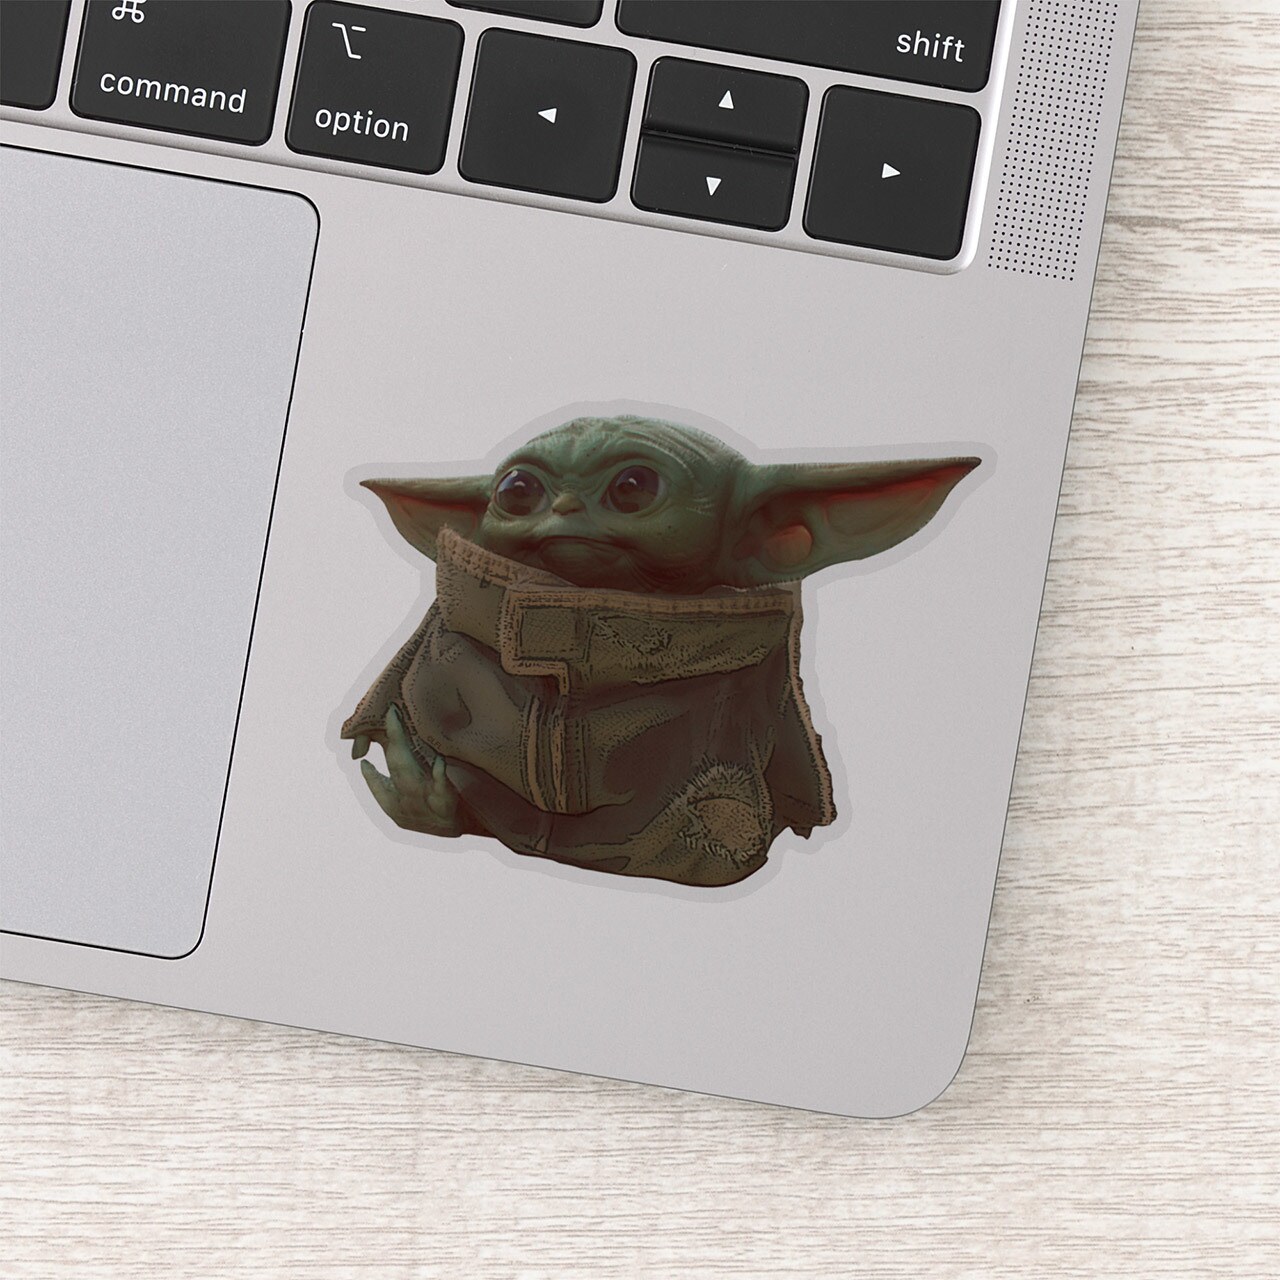 A sticker of Grogu next to the trackpad of a Macbook.